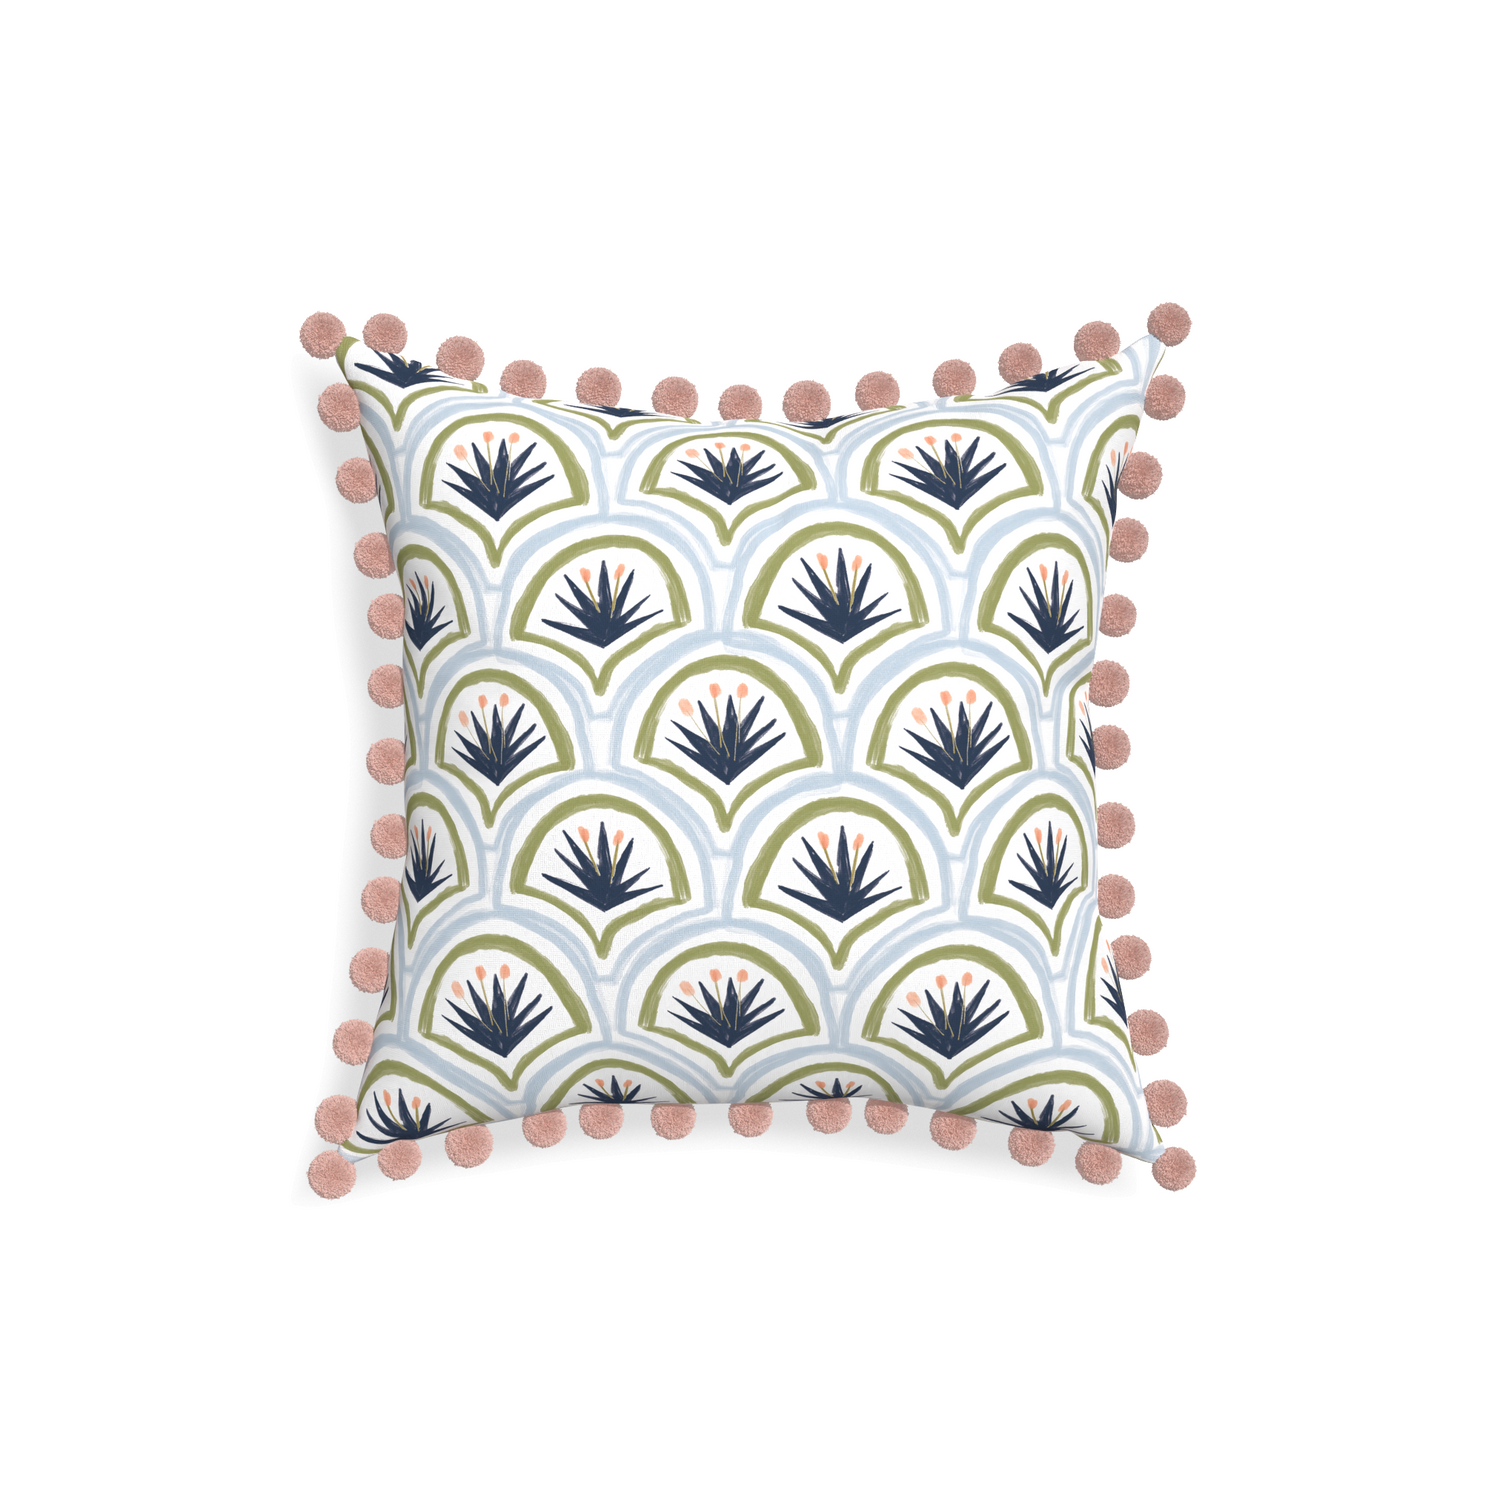 18-square thatcher midnight custom art deco palm patternpillow with rose pom pom on white background